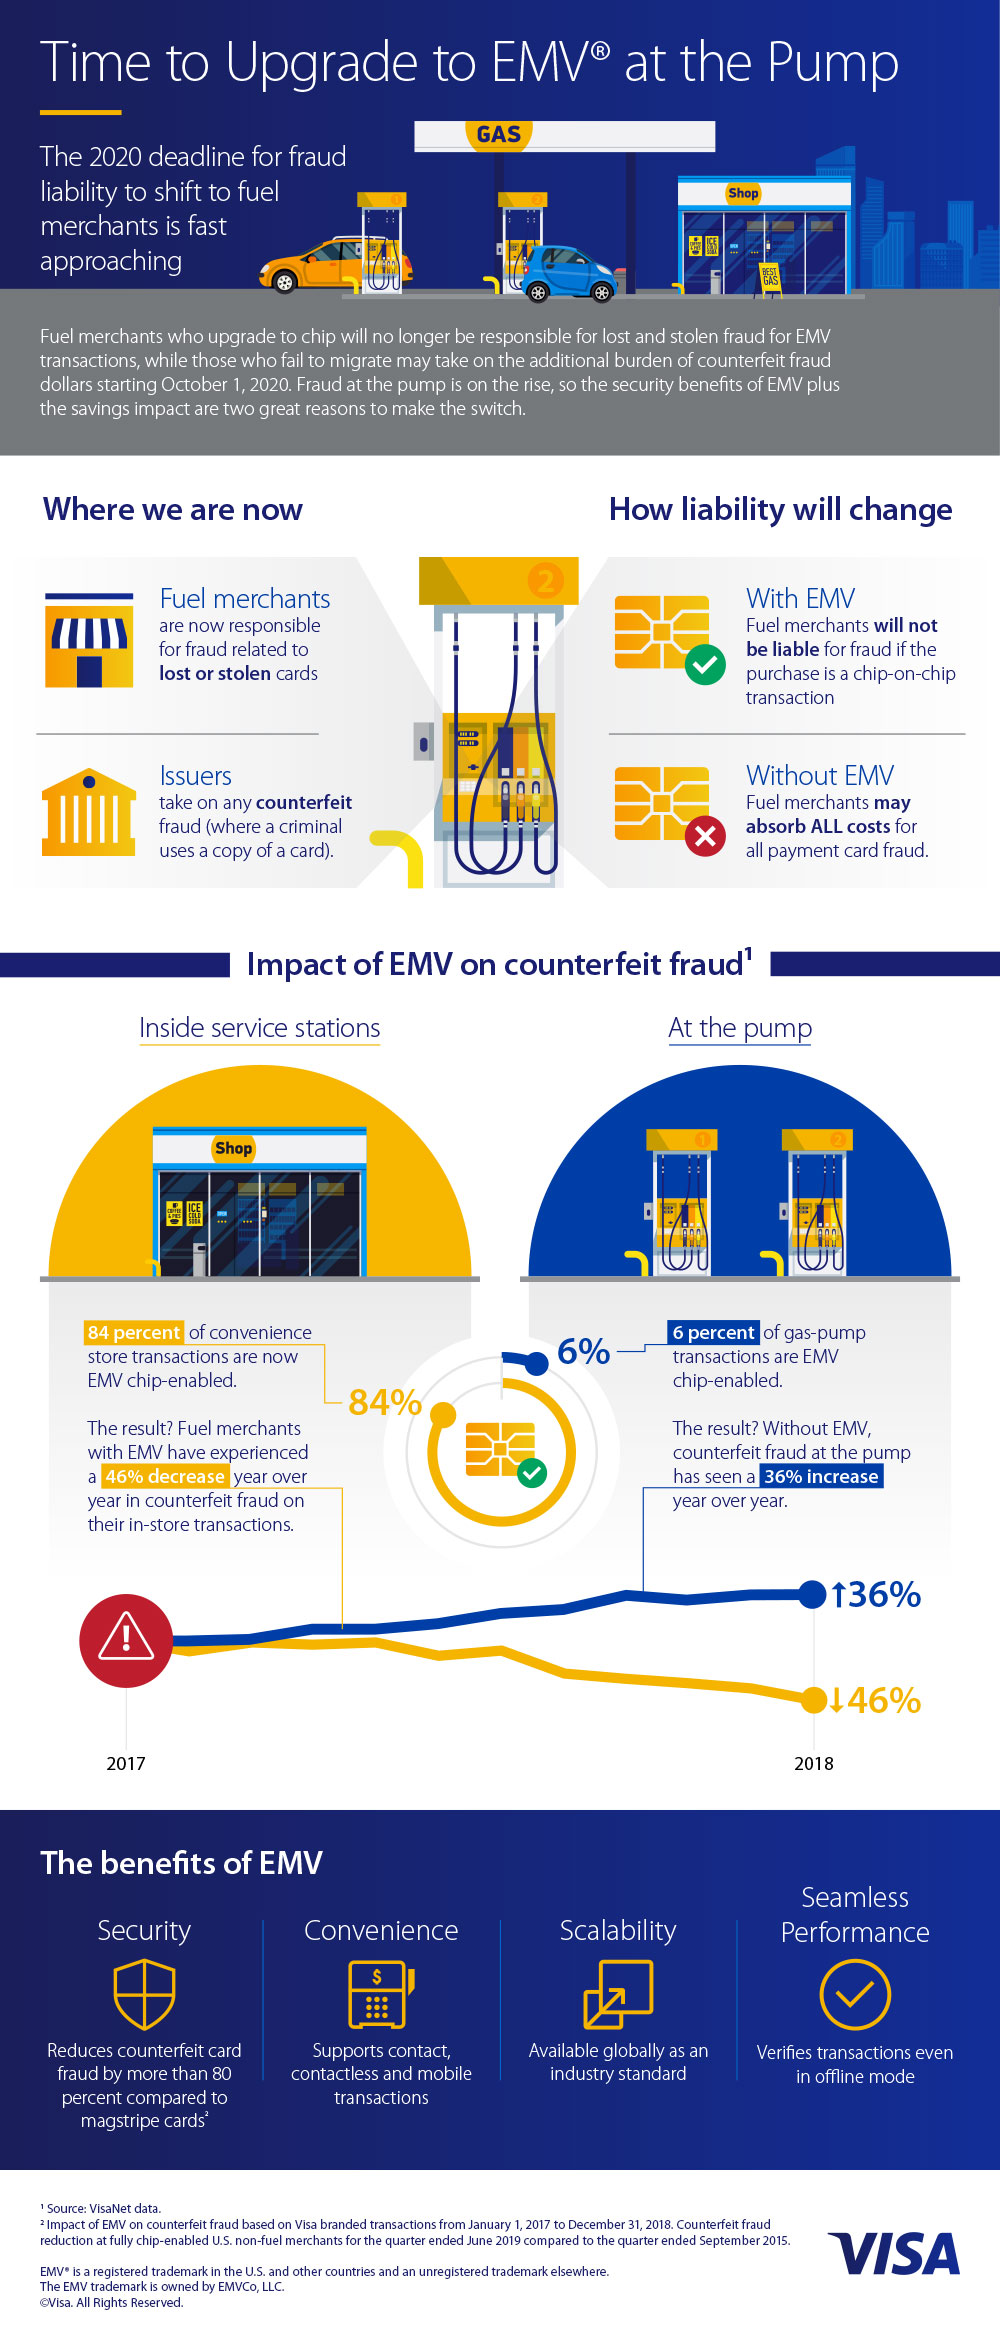 Time to upgrade to EMV at the pump infographic with charts and data